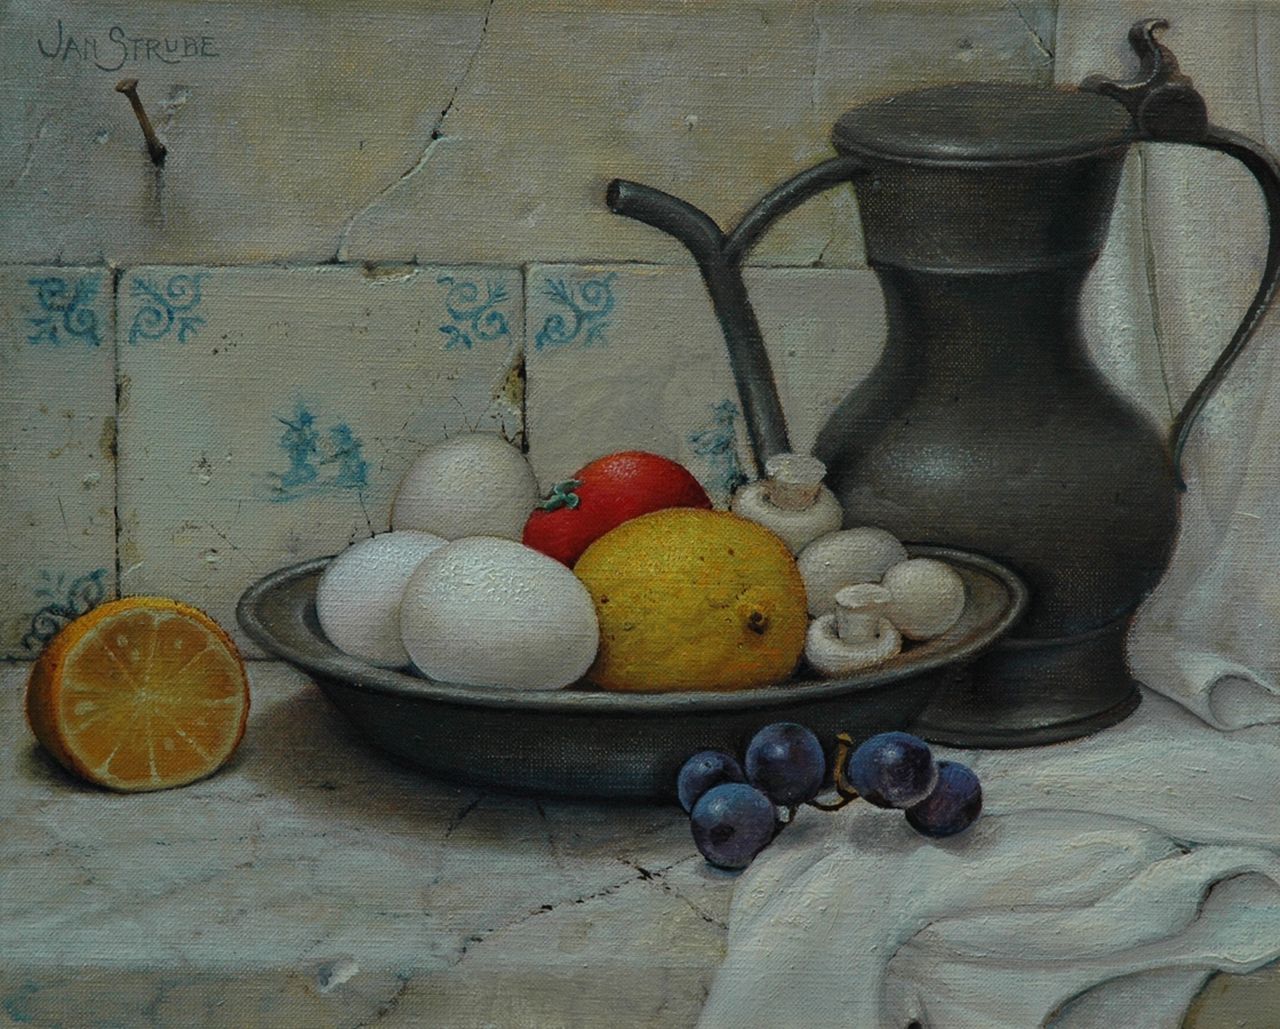 Strube J.H.  | Johan Hendrik 'Jan' Strube, A still life with fruit and a pewter jug, oil on canvas 24.2 x 30.4 cm, signed u.r.